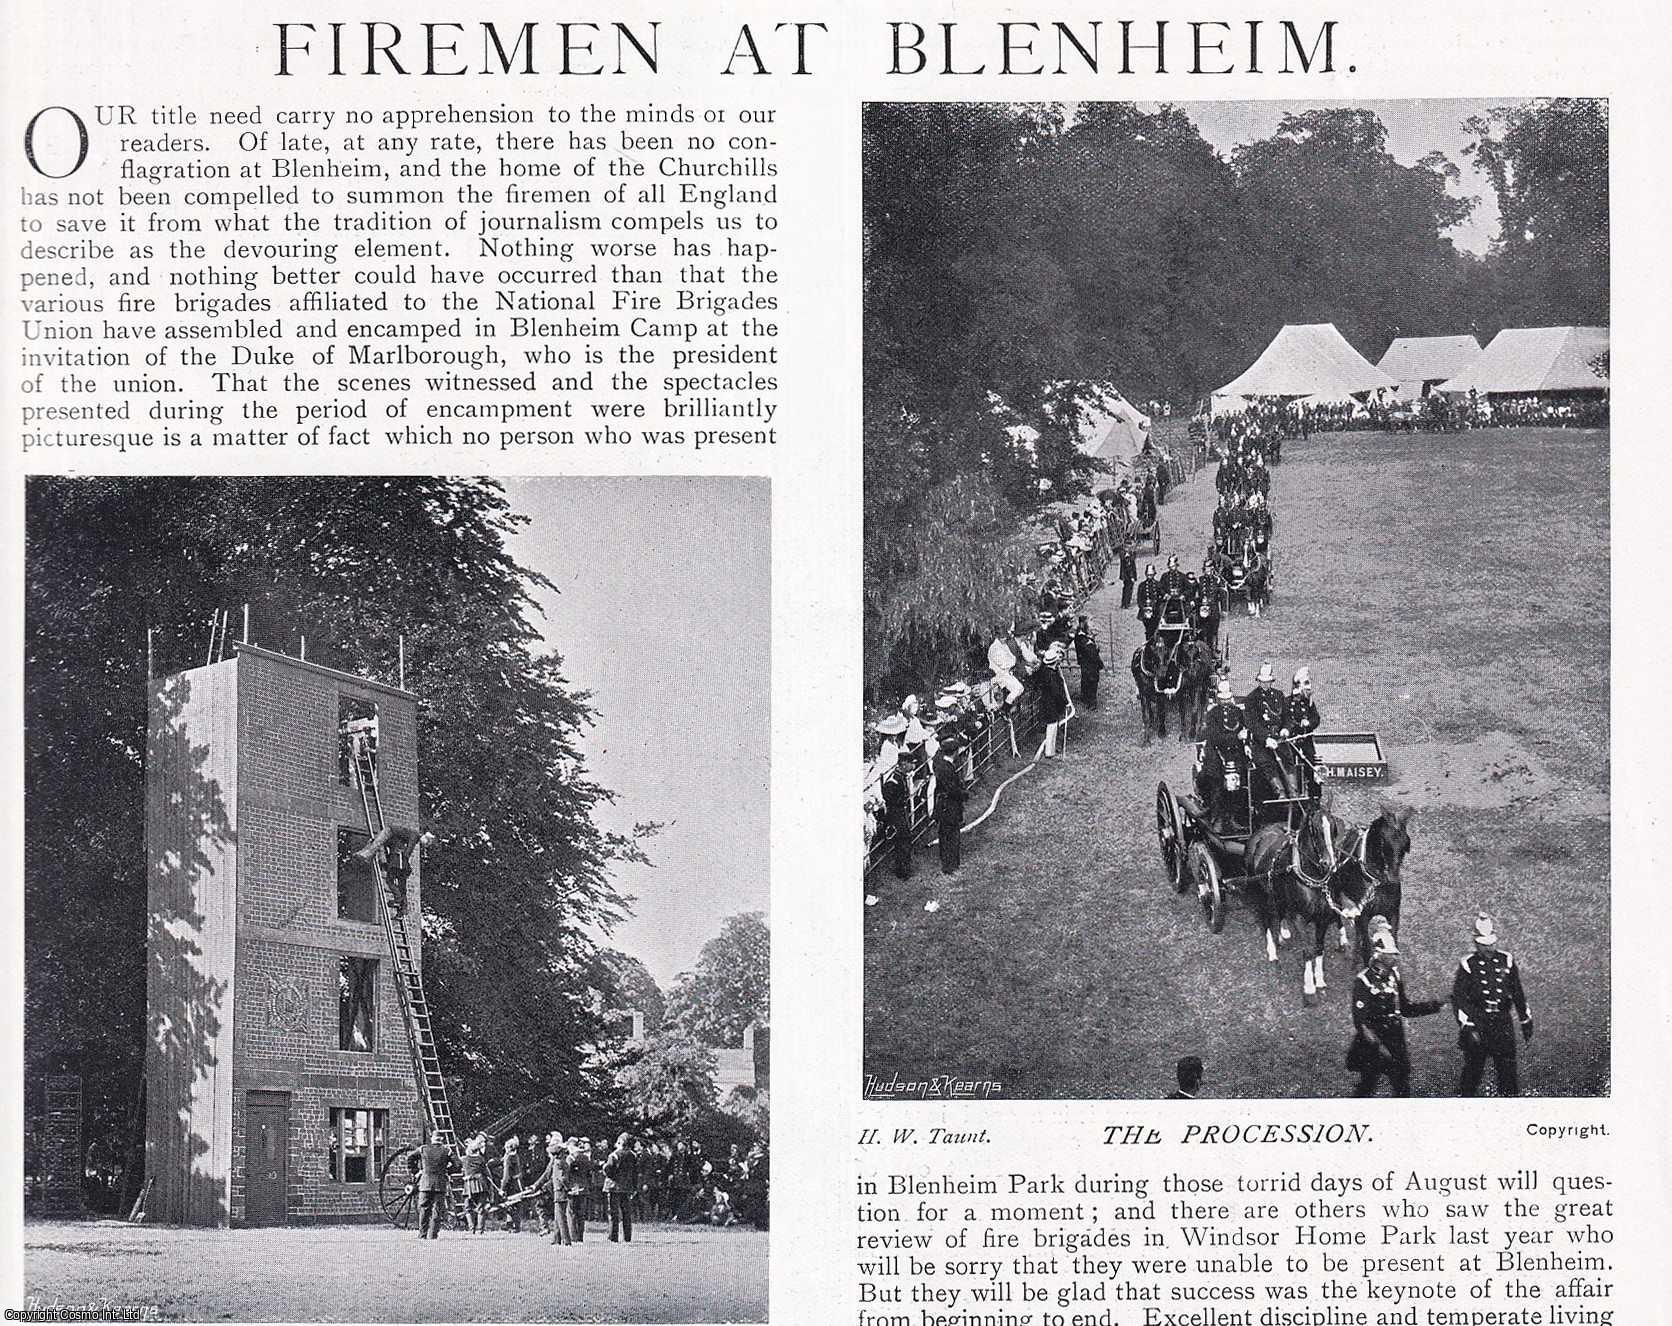 COUNTRY LIFE - The National Fire Brigades Union Encamped at Blenheim, at the Invitation of the Duke of Marlborough. Several pictures and accompanying text, removed from an original issue of Country Life Magazine, 1898.